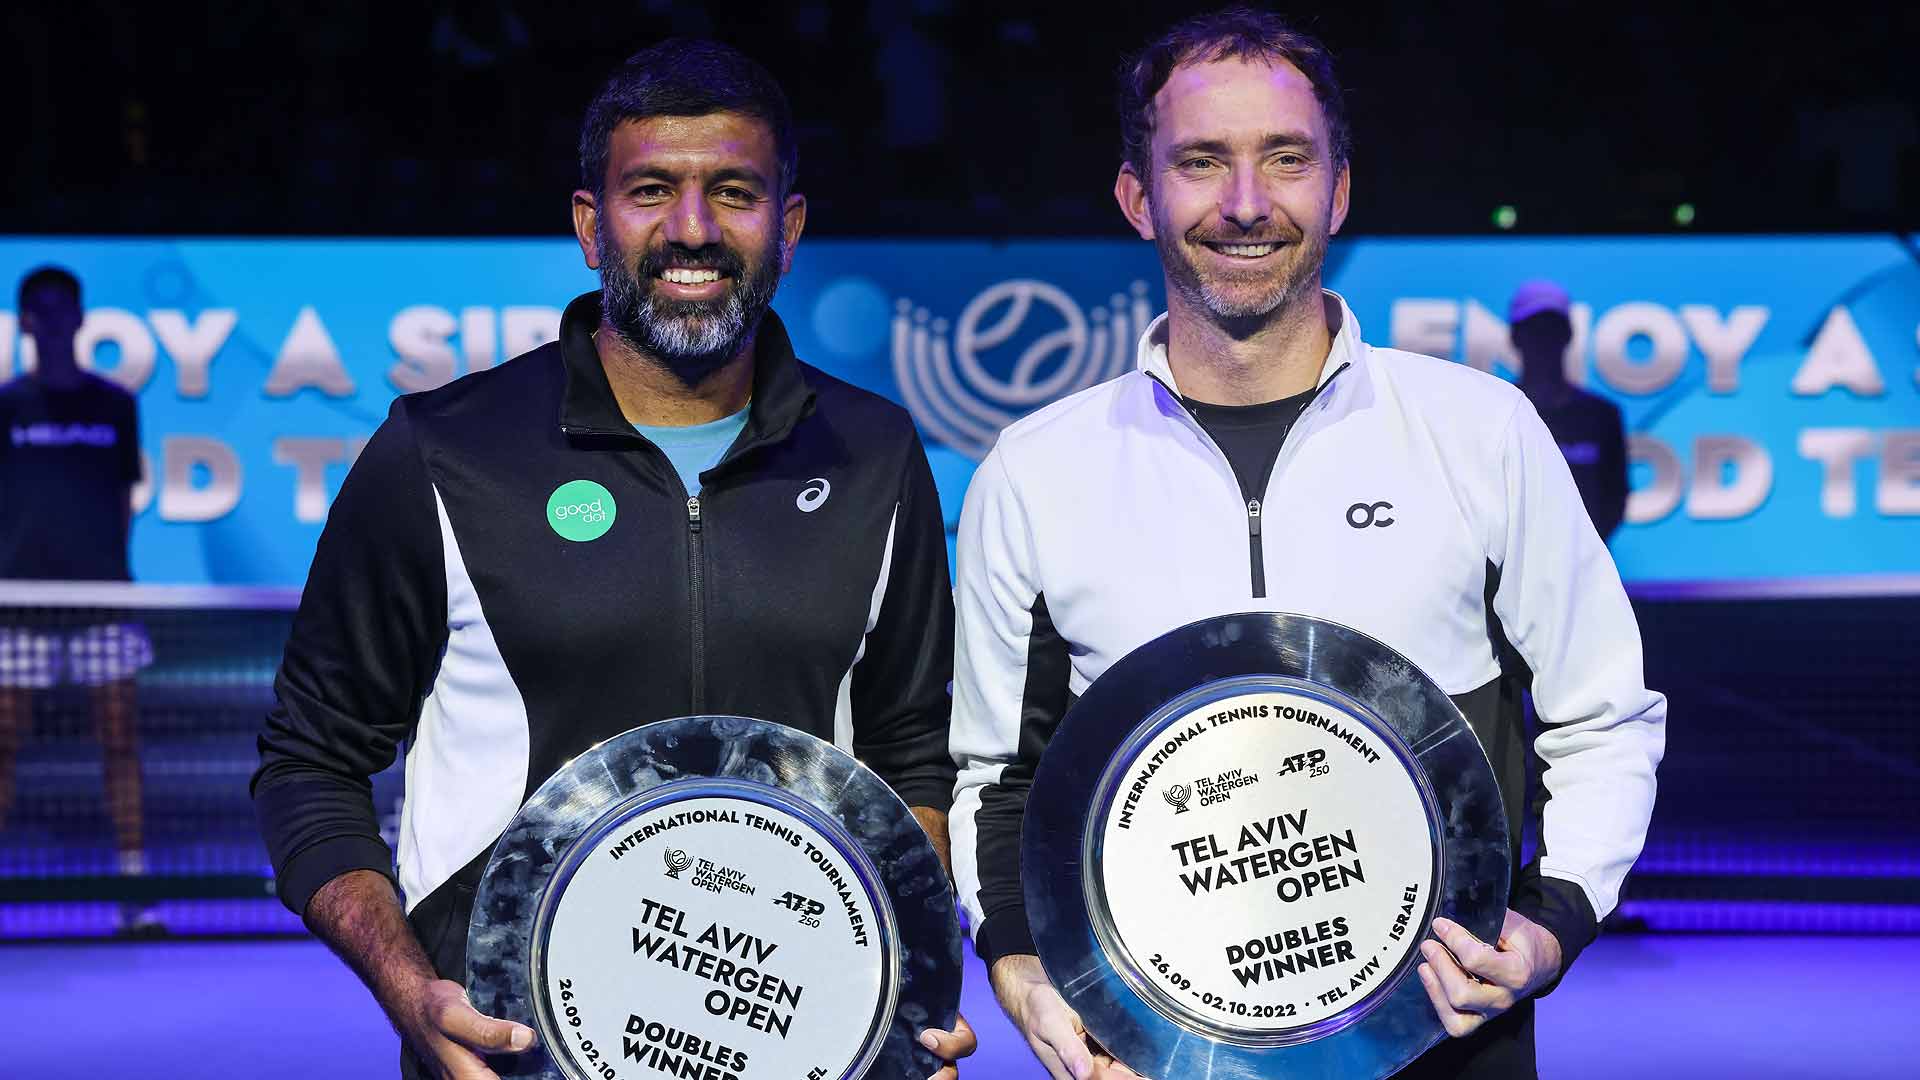 Rohan Bopanna and Matwe Middelkoop defeat Santiago Gonzalez and Andres Molteni in the Tel Aviv final on Sunday in straight sets.